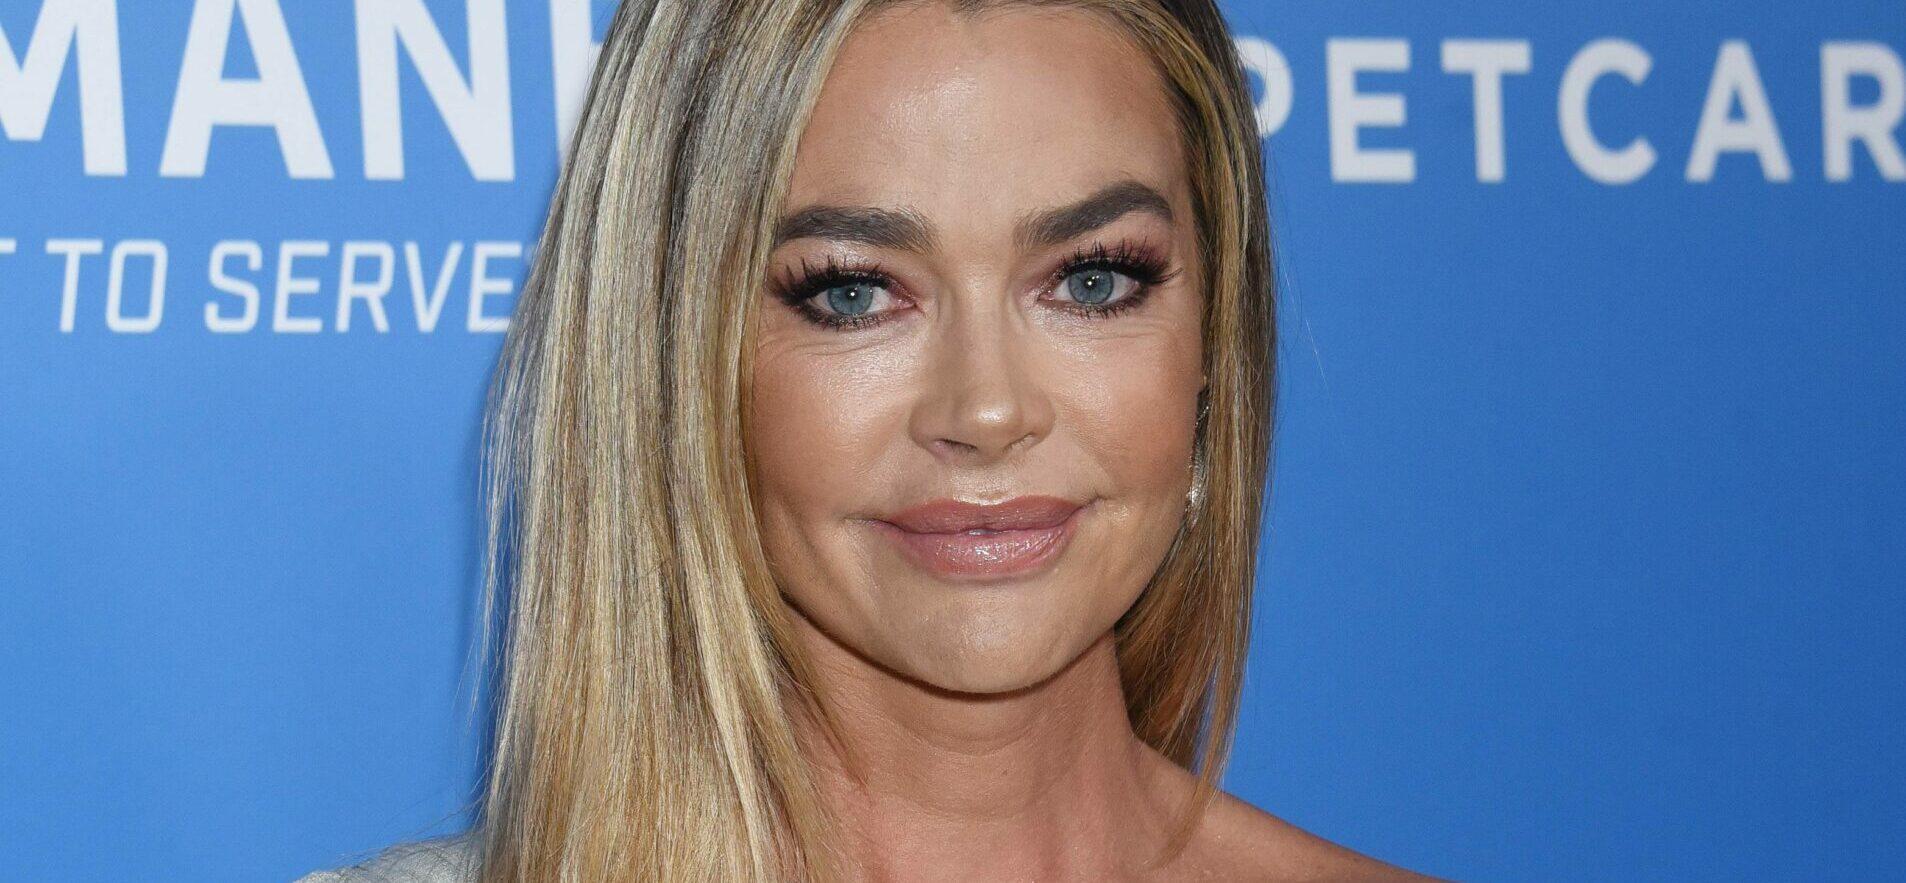 Denise Richards Reportedly Earns $2M A MONTH From OnlyFans